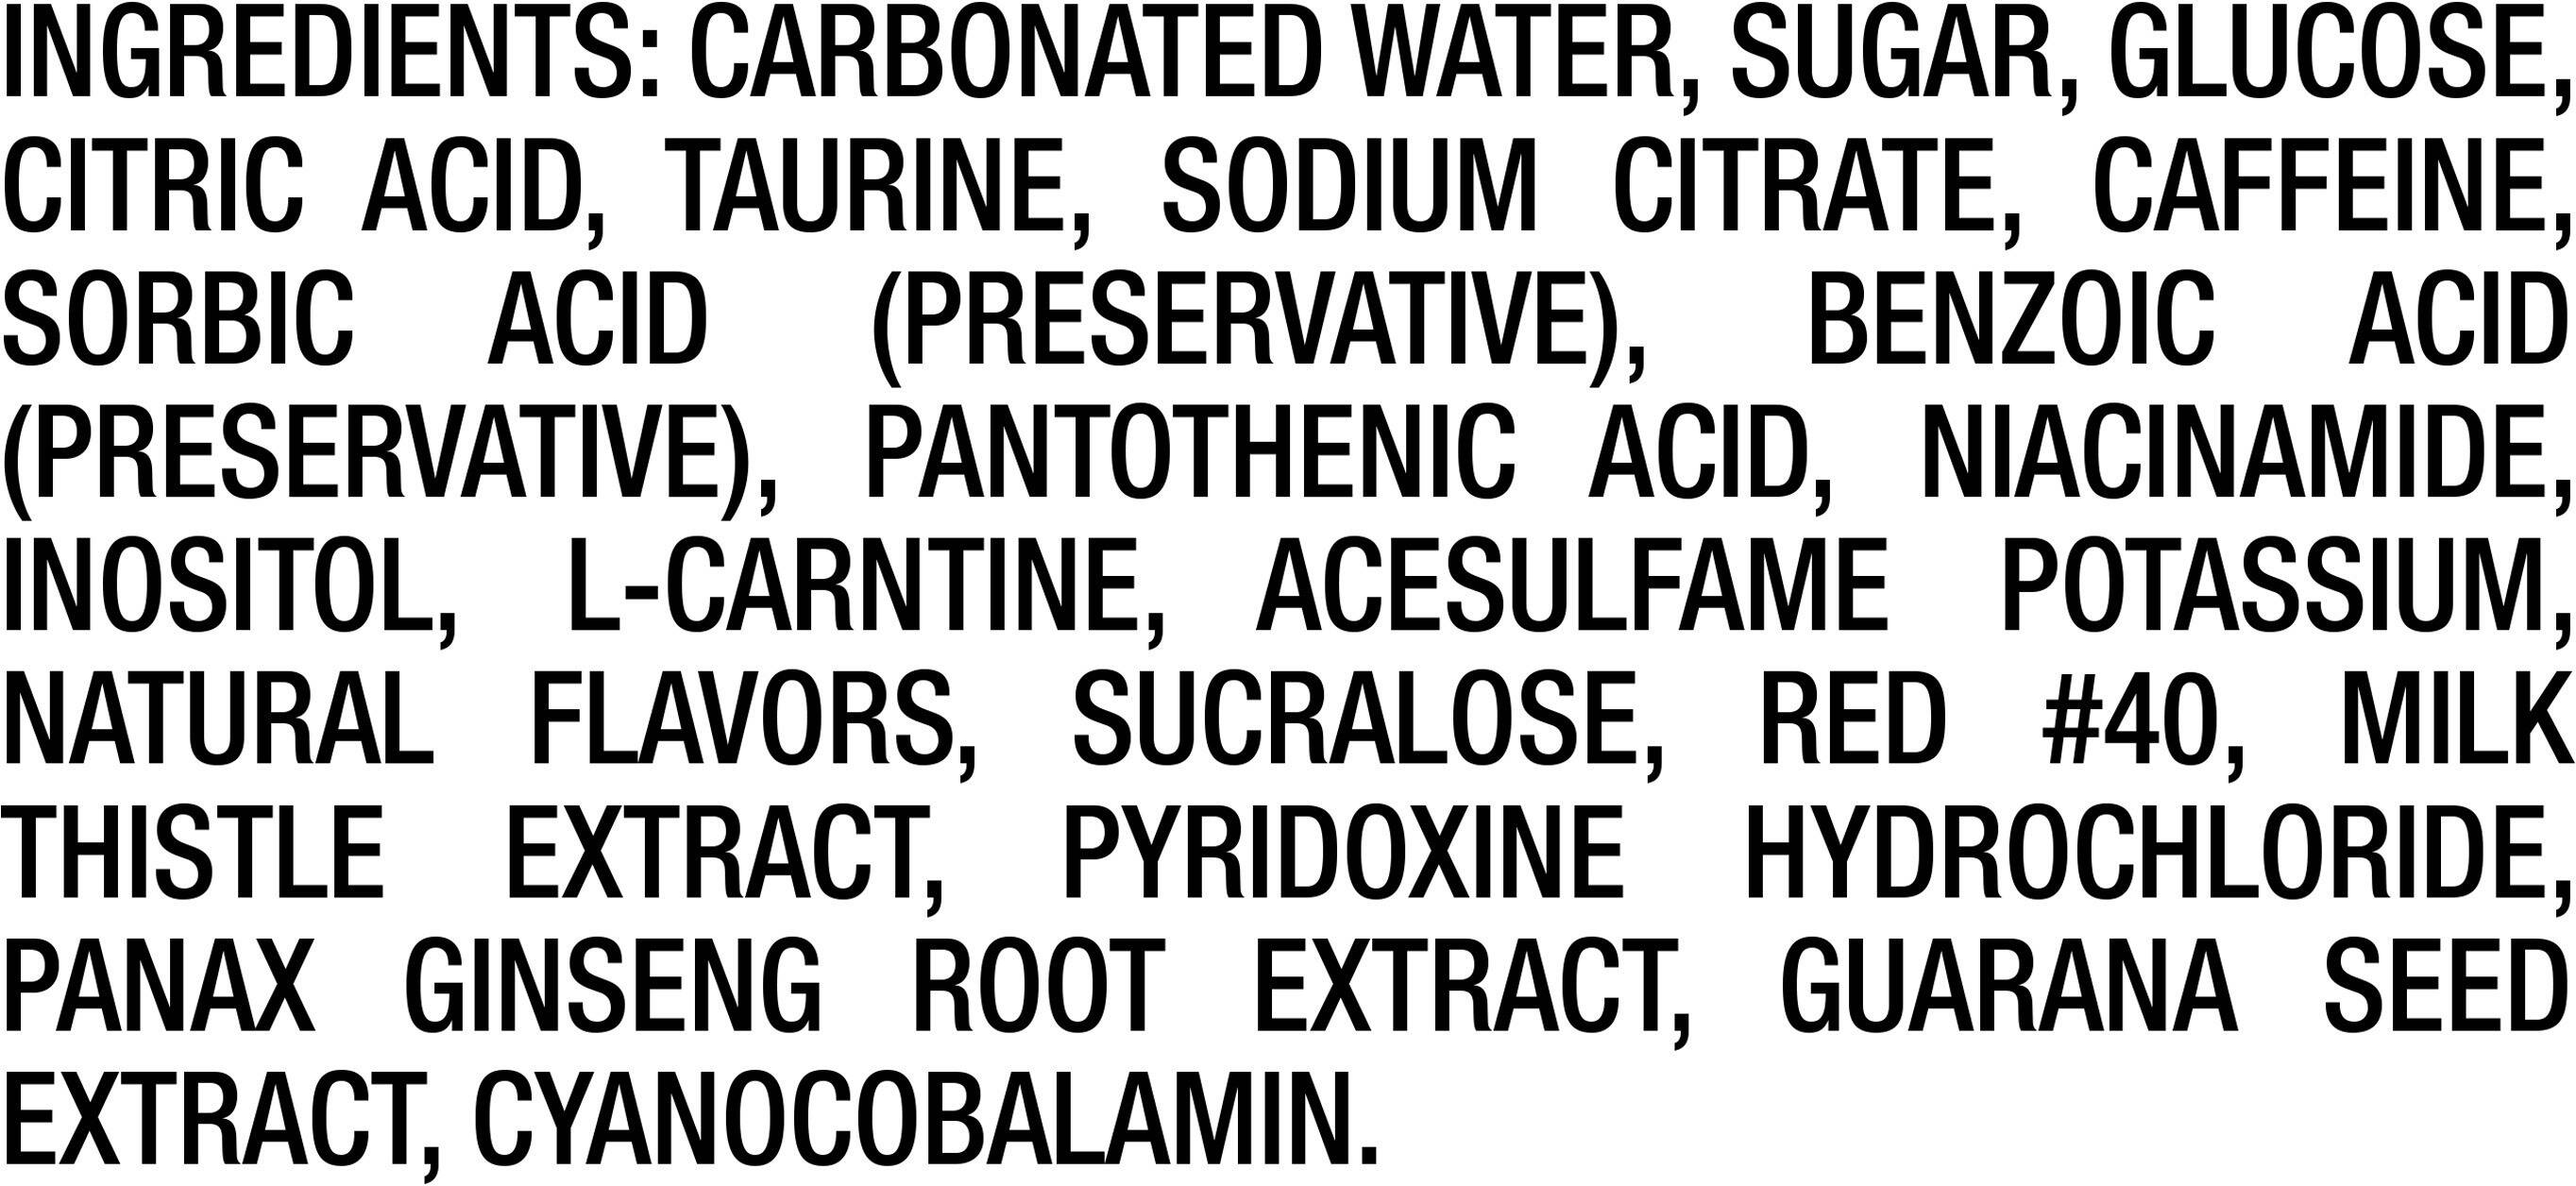 Image describing nutrition information for product Rockstar Punched Fruit Punch